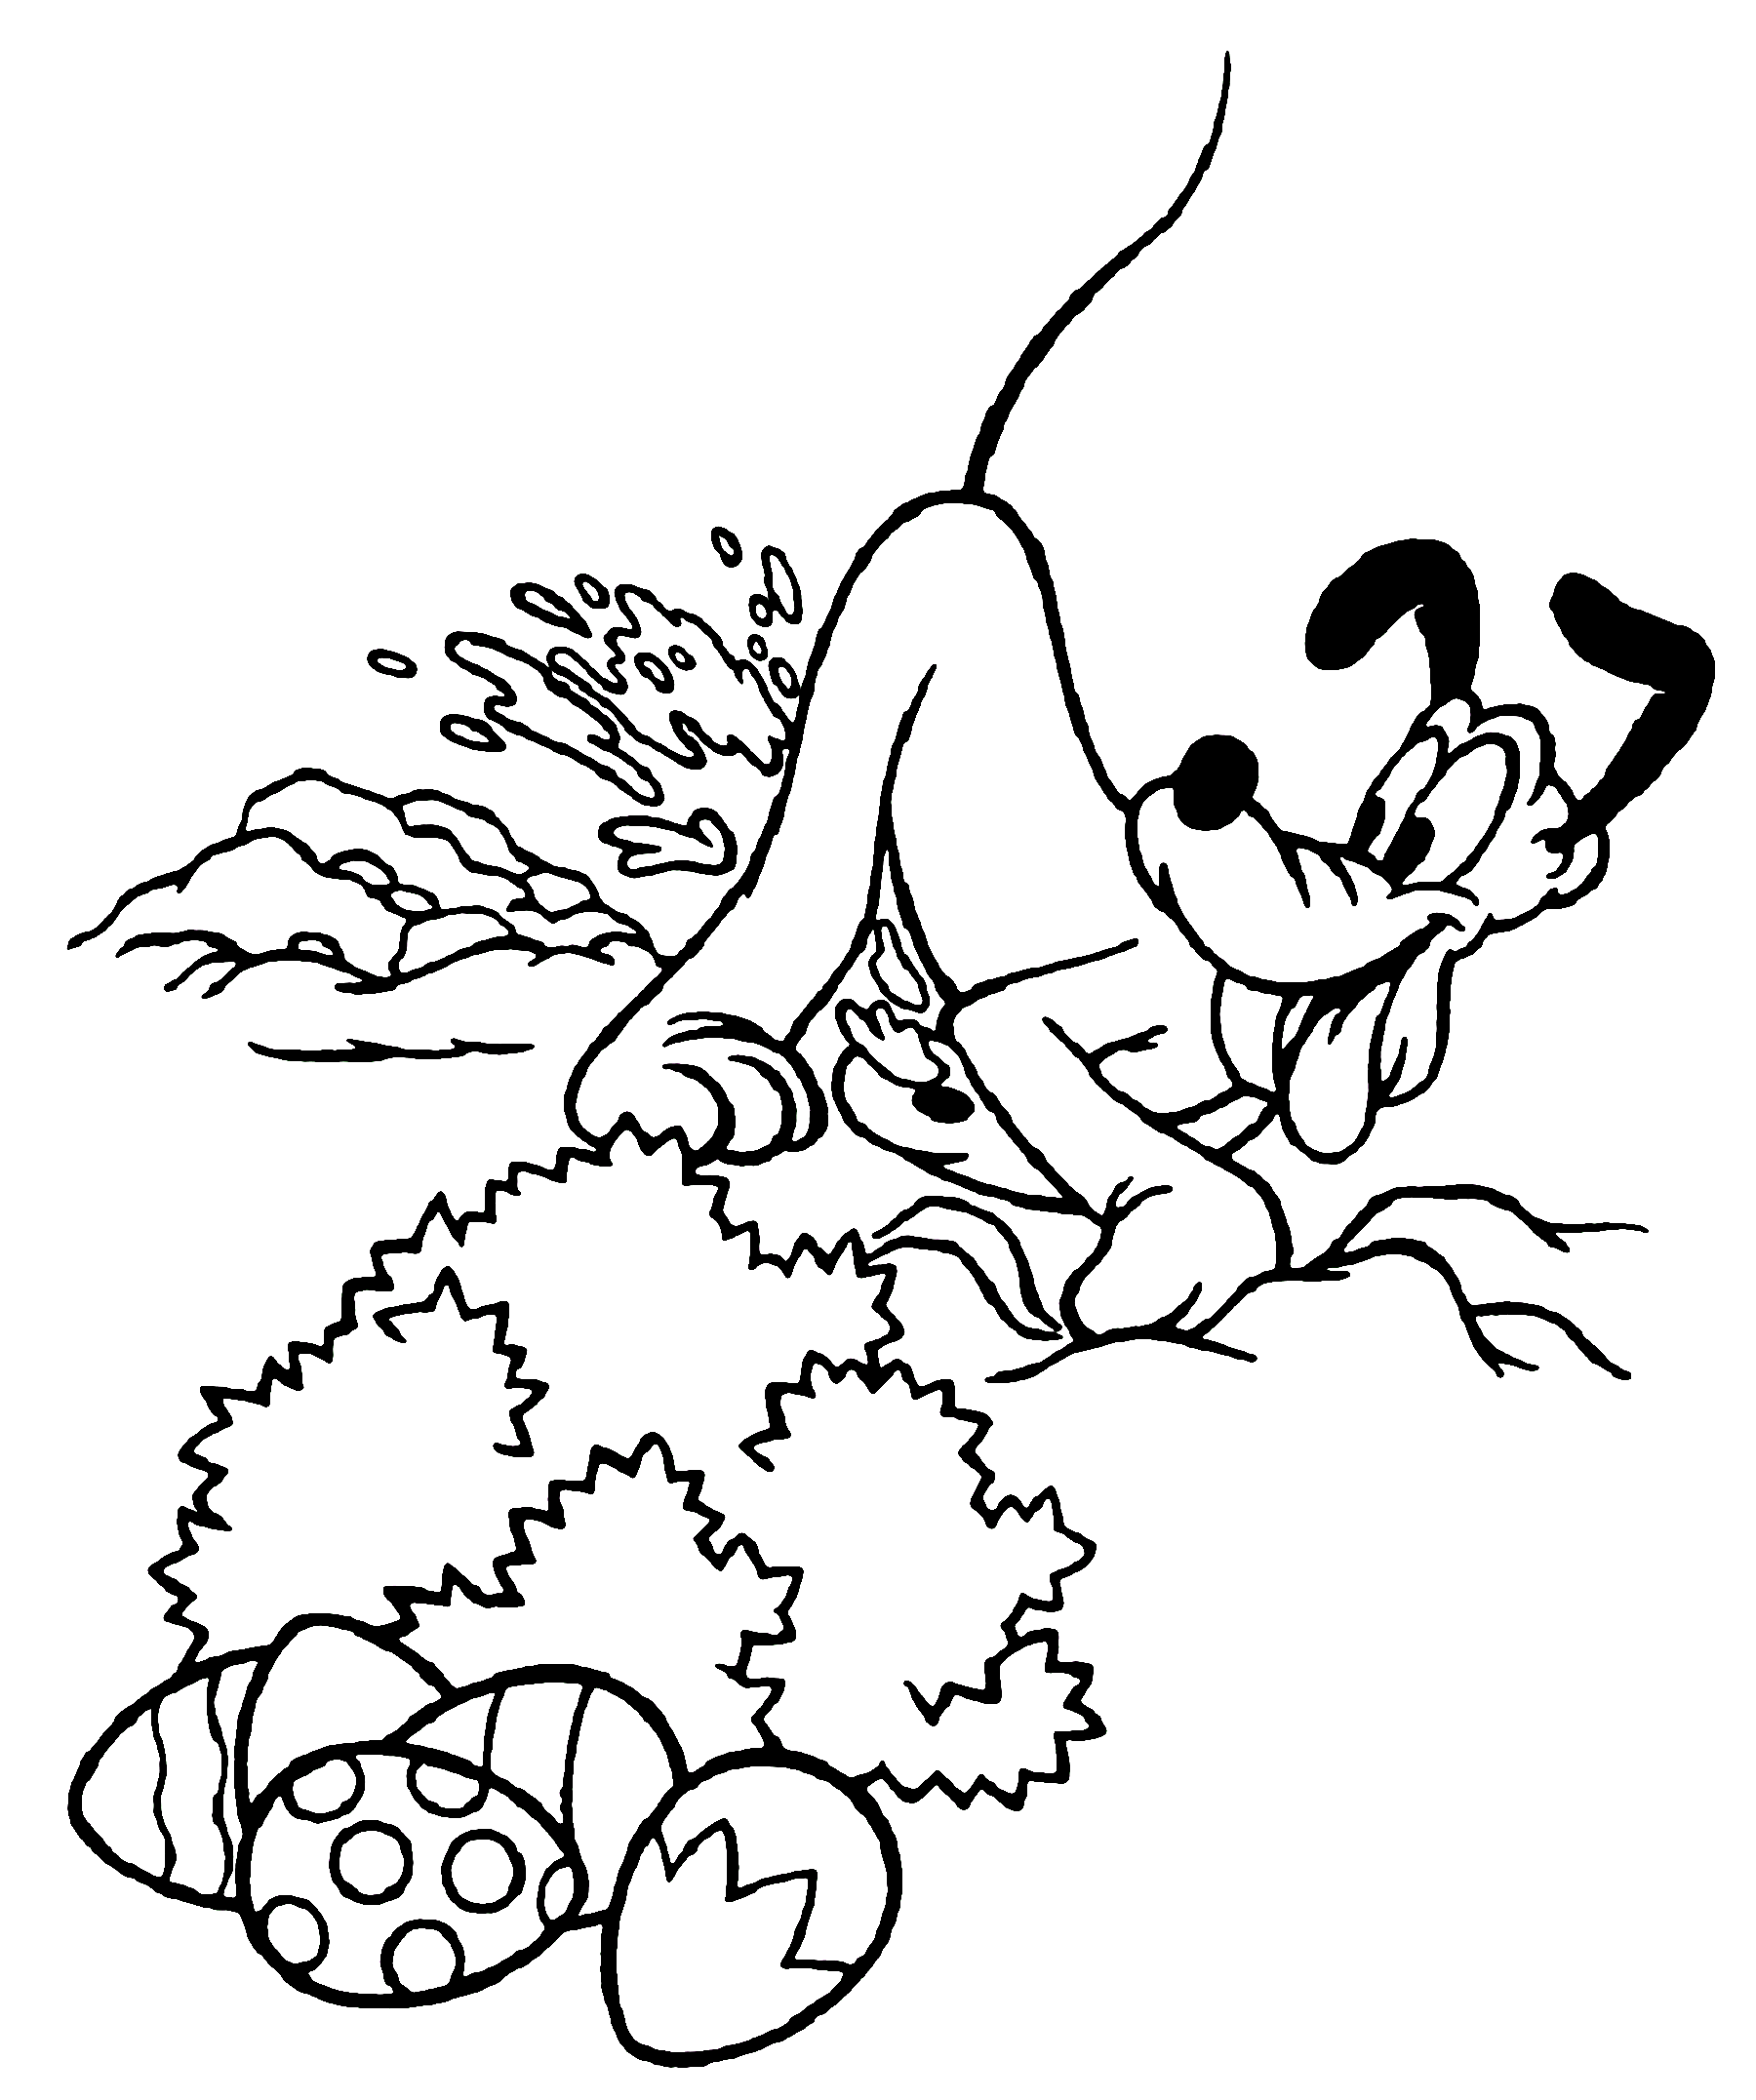 Cute & Easy Pluto Coloring Pages for Toddlers.